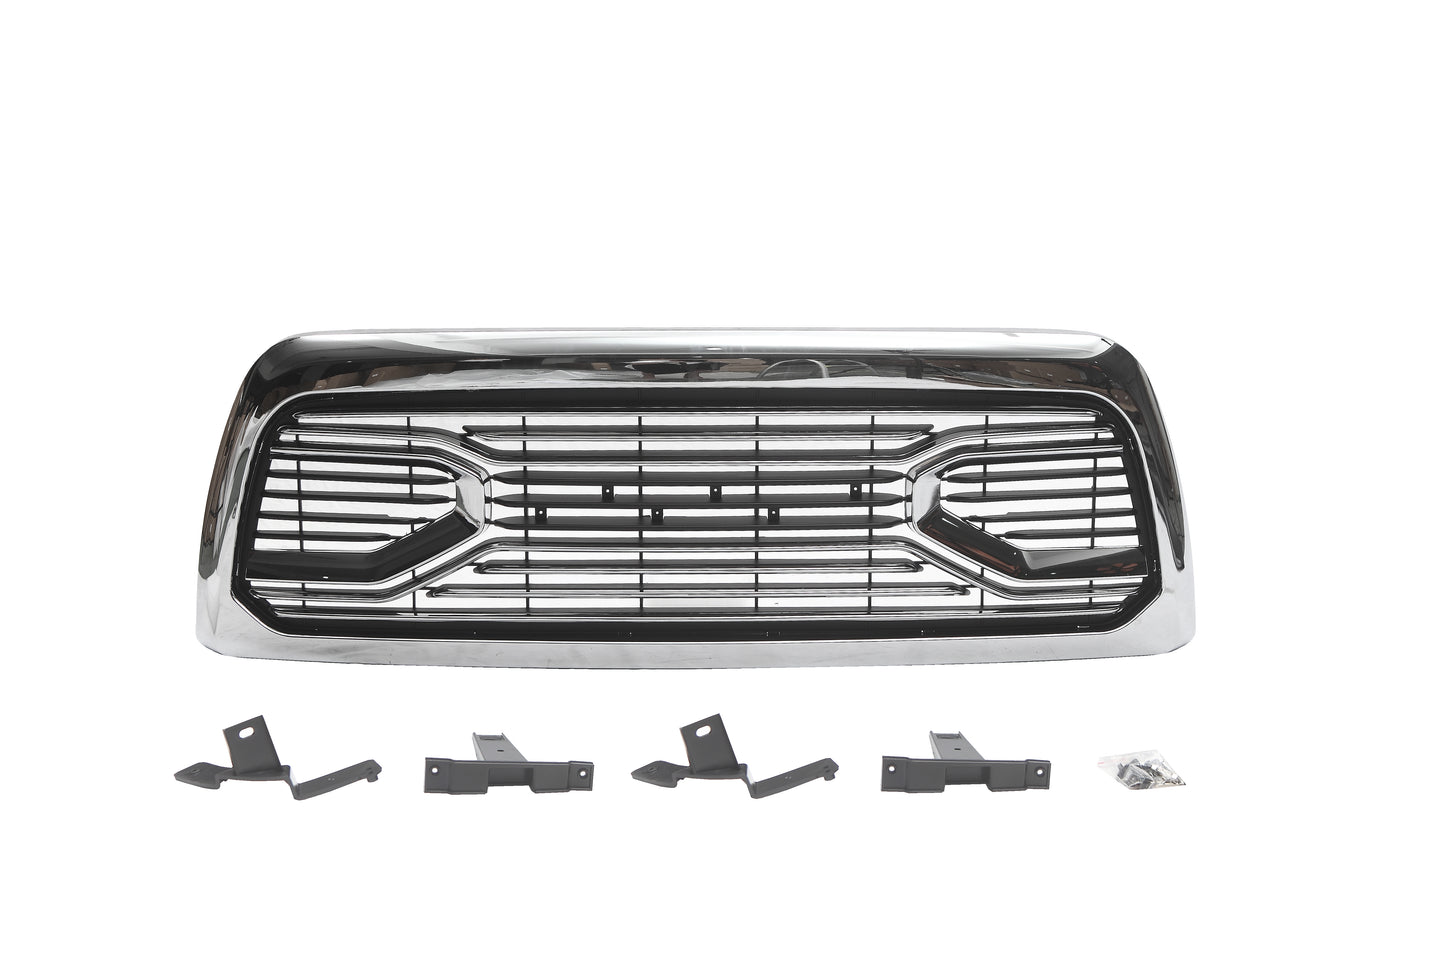 Front Grille For 2013 2014 2015 2016 2017 2018 Dodge RAM 2500 3500 Chrome Grill Big Horn Style With Letters W/LED Lights